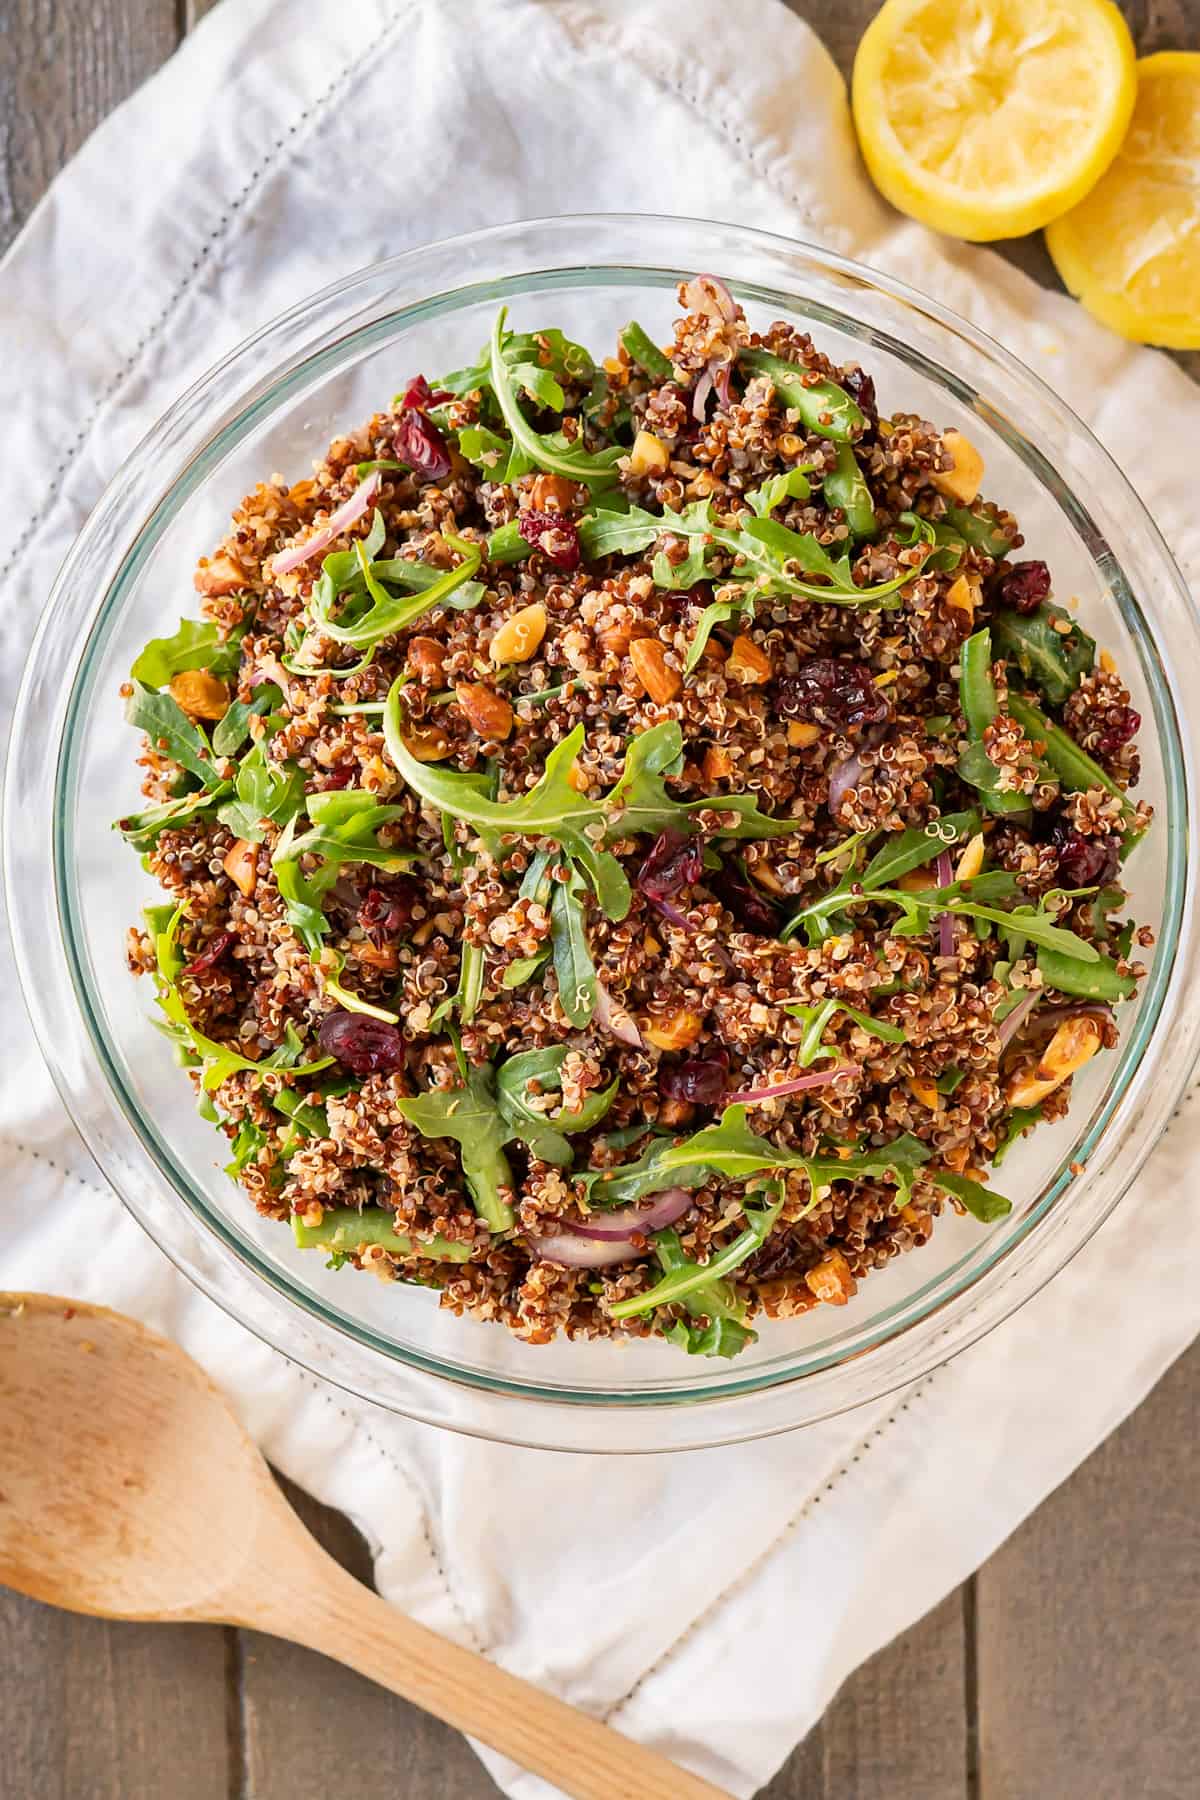 A large glass serving bowl of arugula quinoa salad with almonds and green beans.